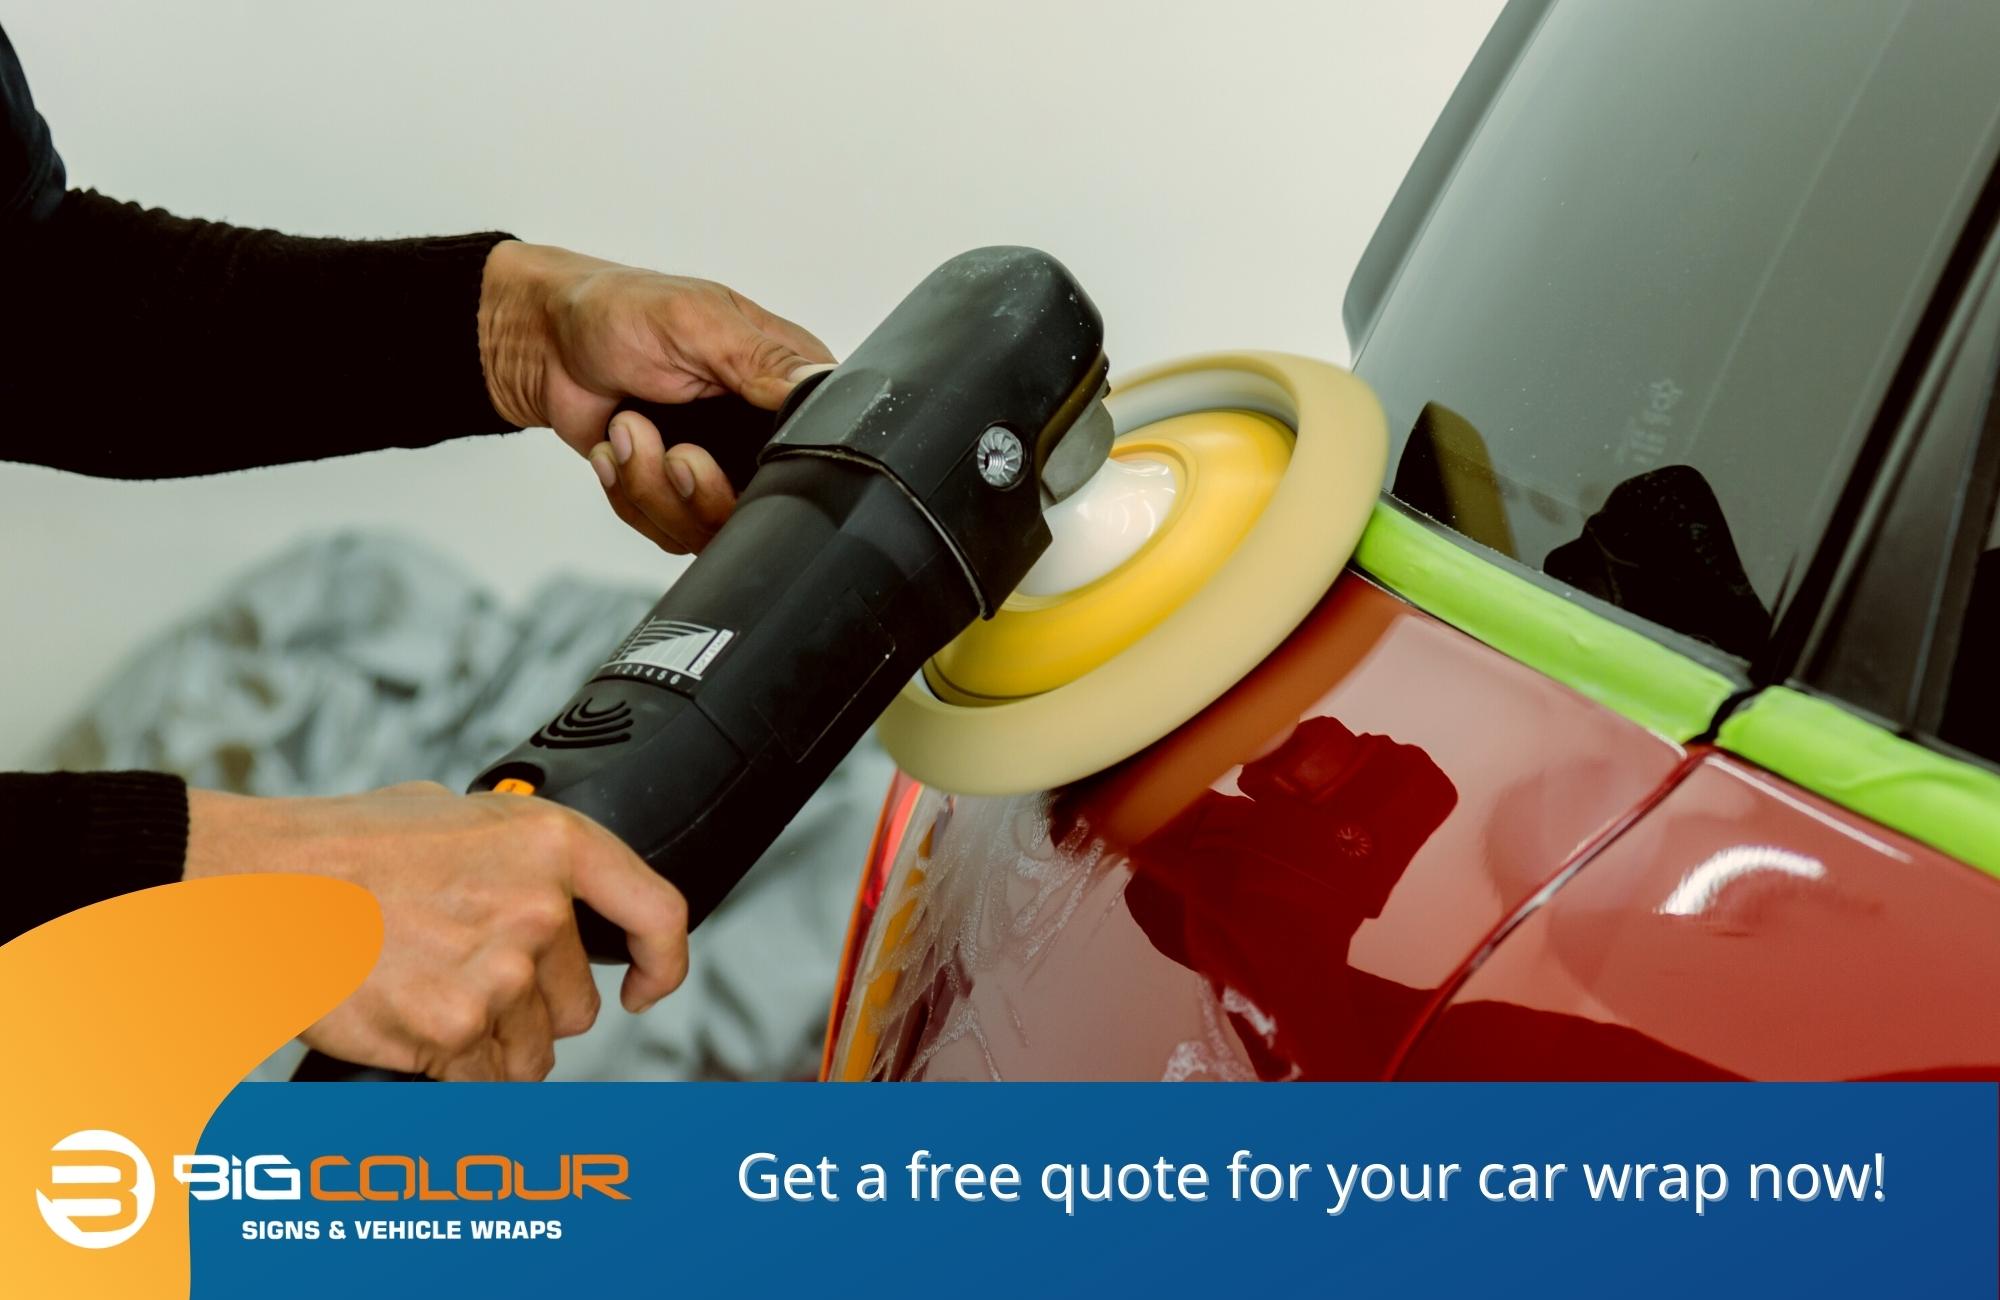 Get a free quote for your car wrap now!